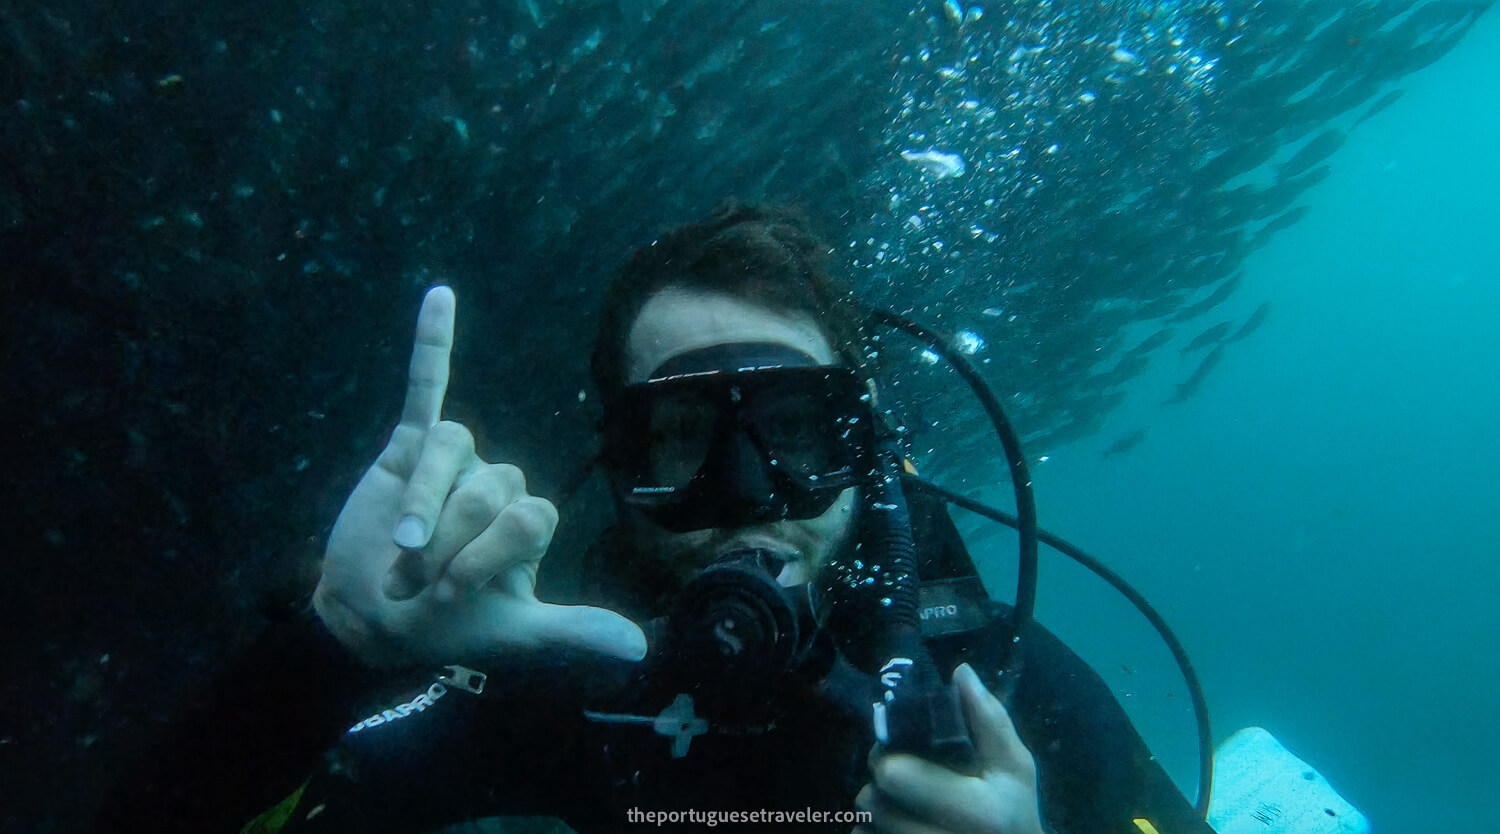 My dive buddy Diogo